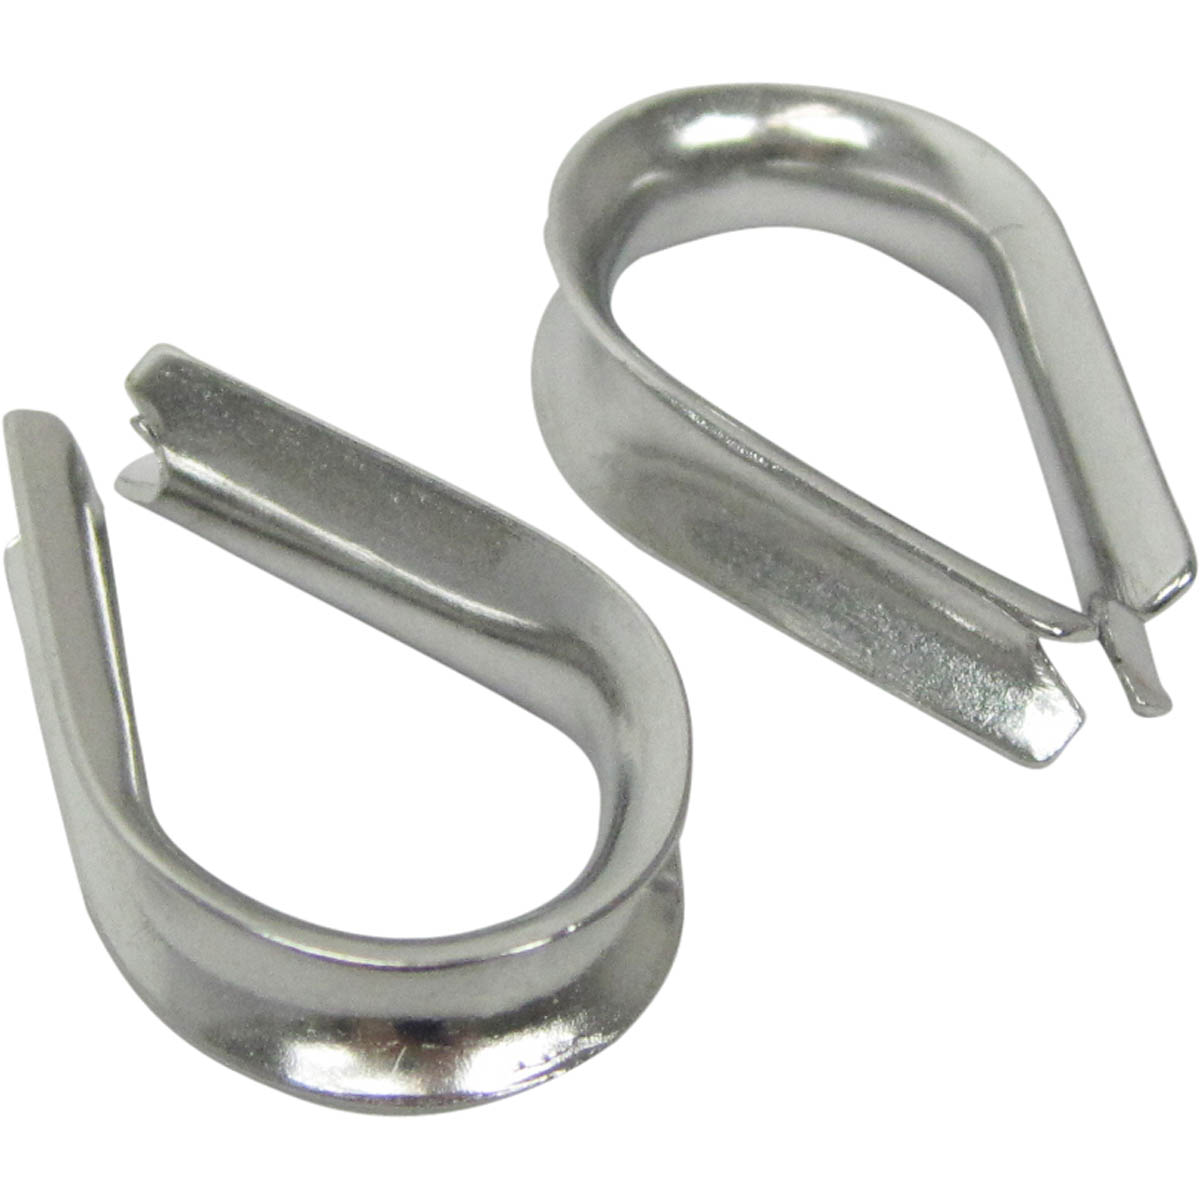 Blueline Stainless Steel Thimble 5mm